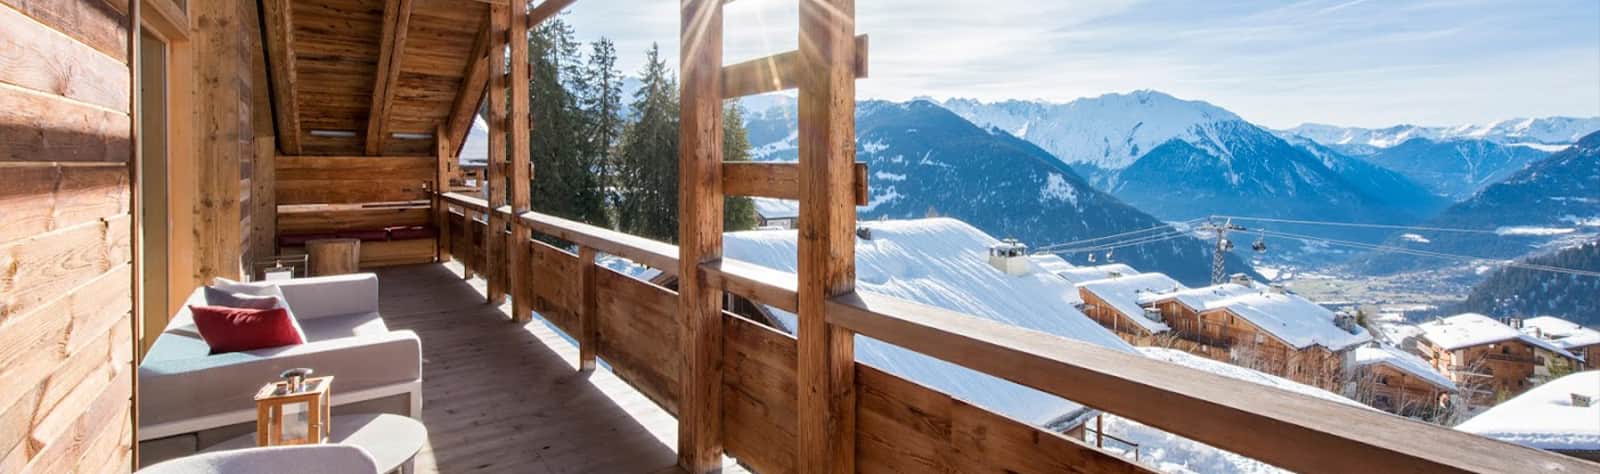 View of a Swiss ski resort from a luxury chalet